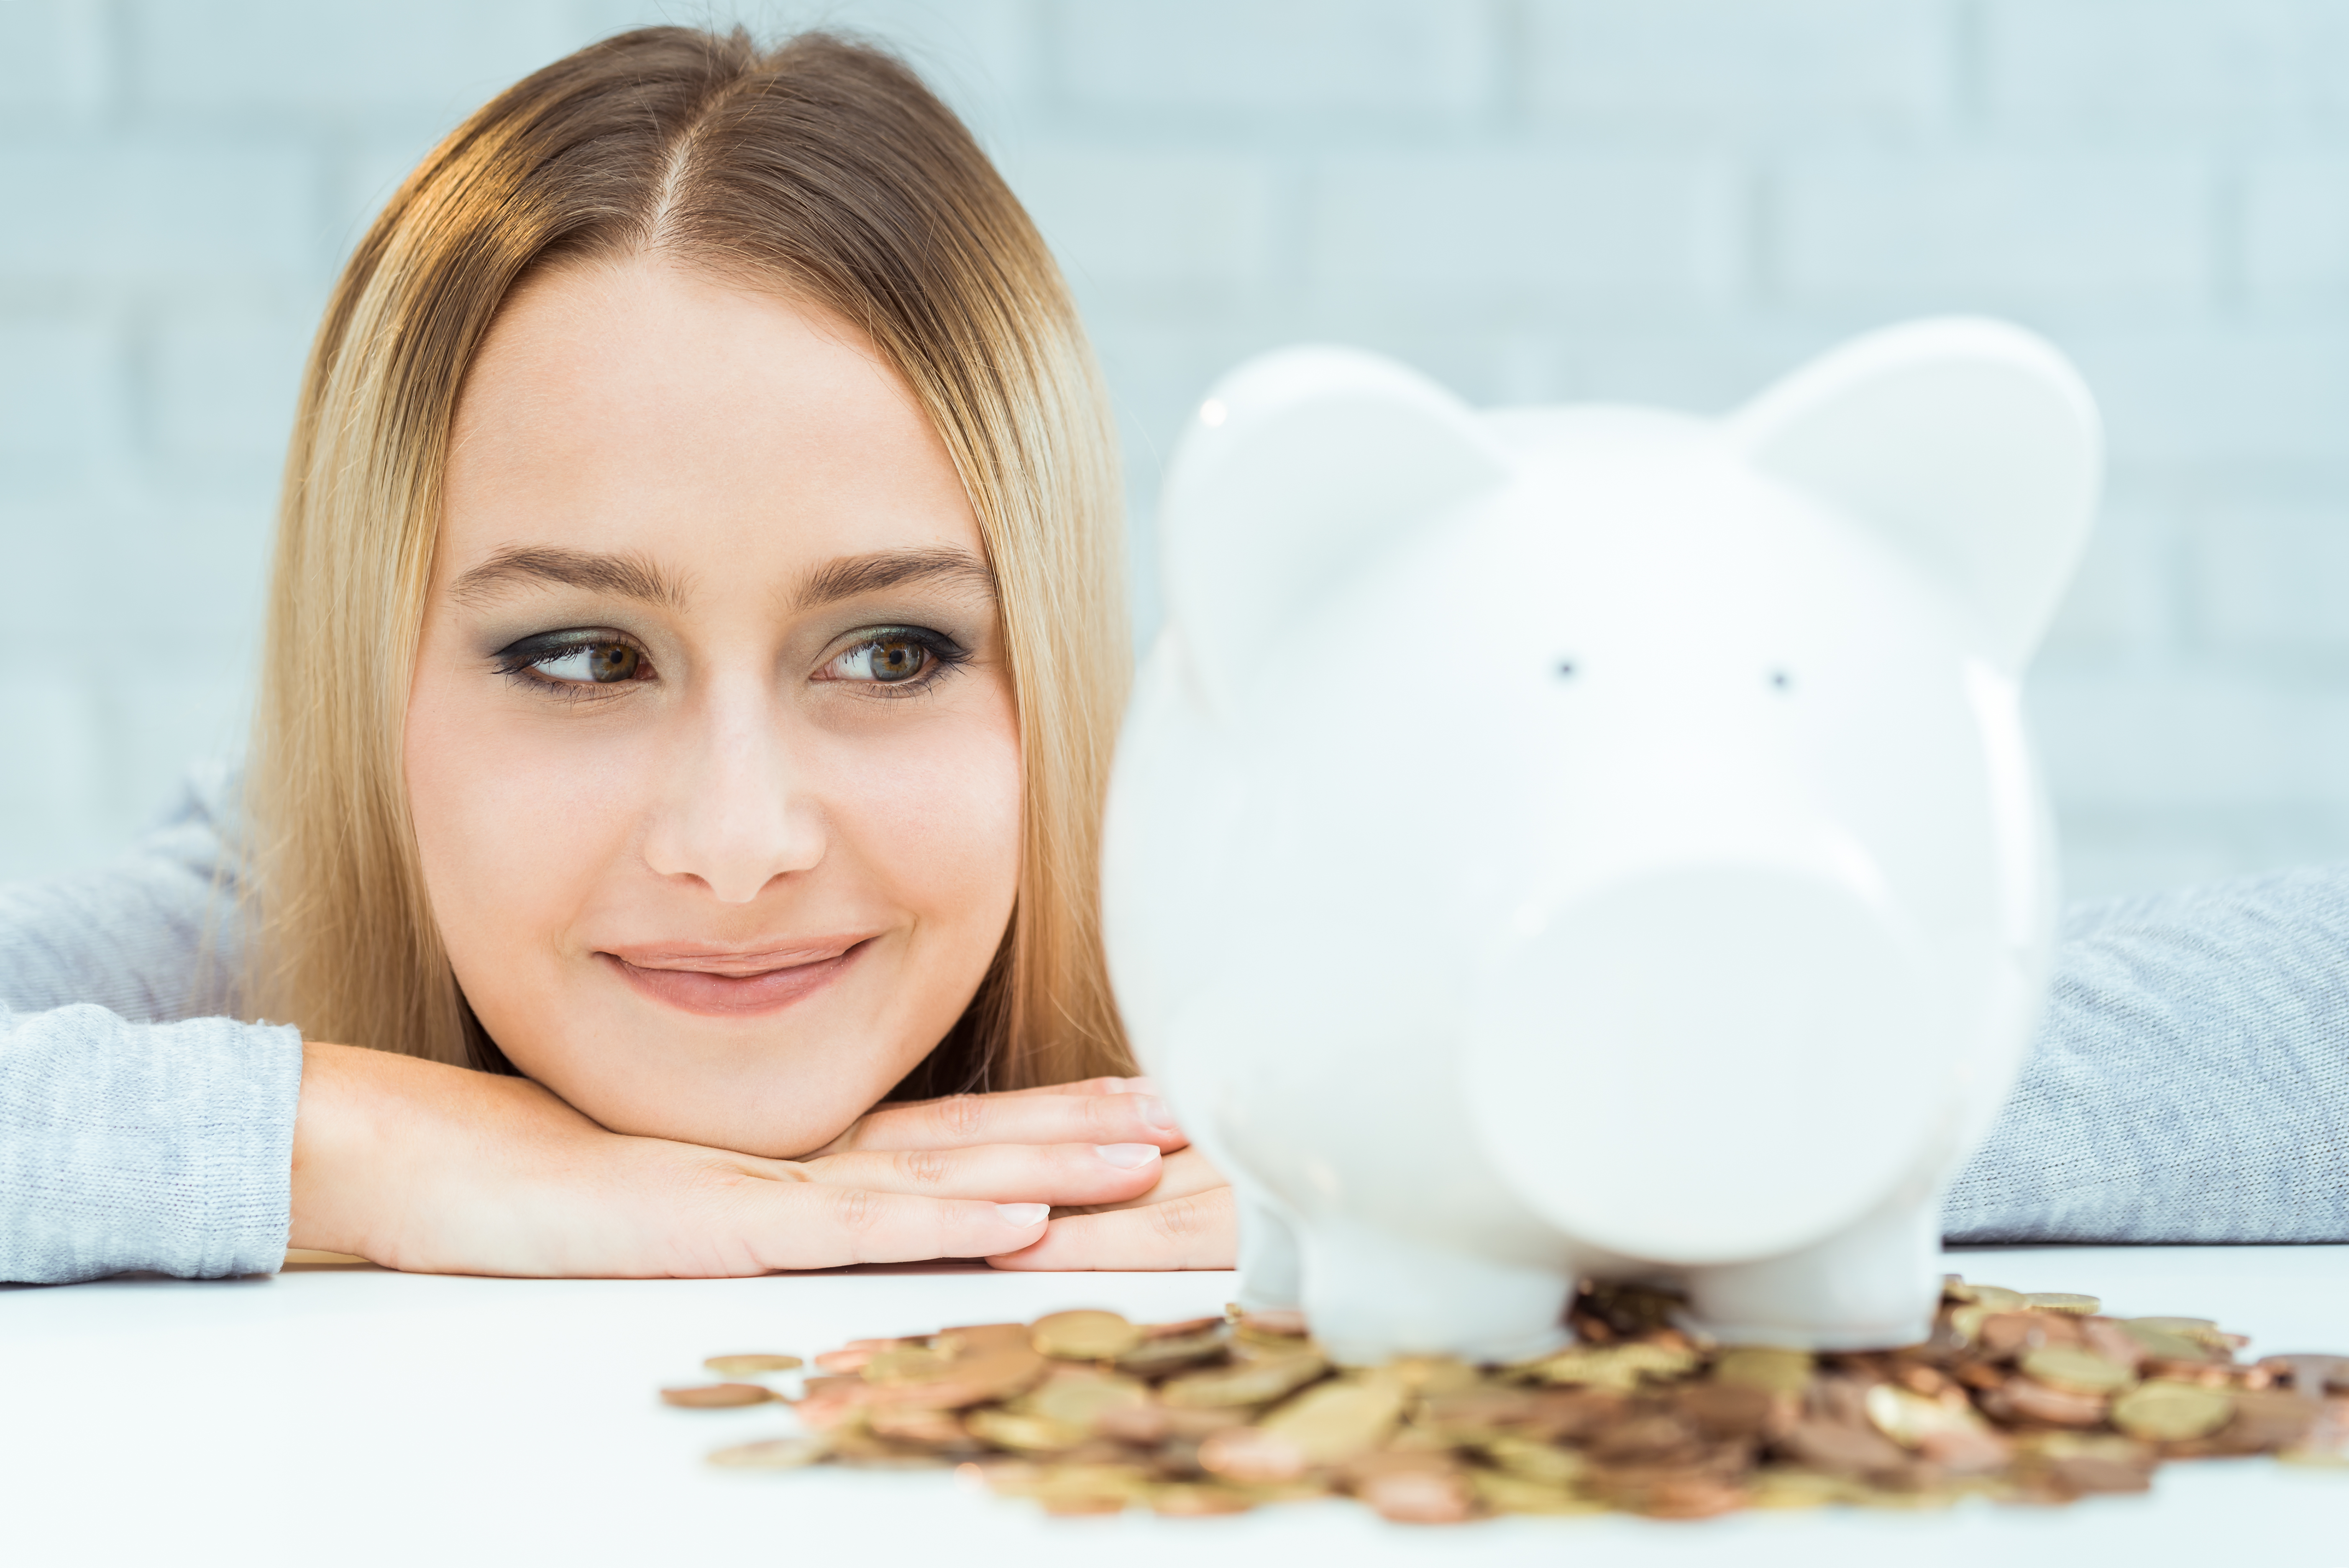 Young blond woman in front of a piggy bank